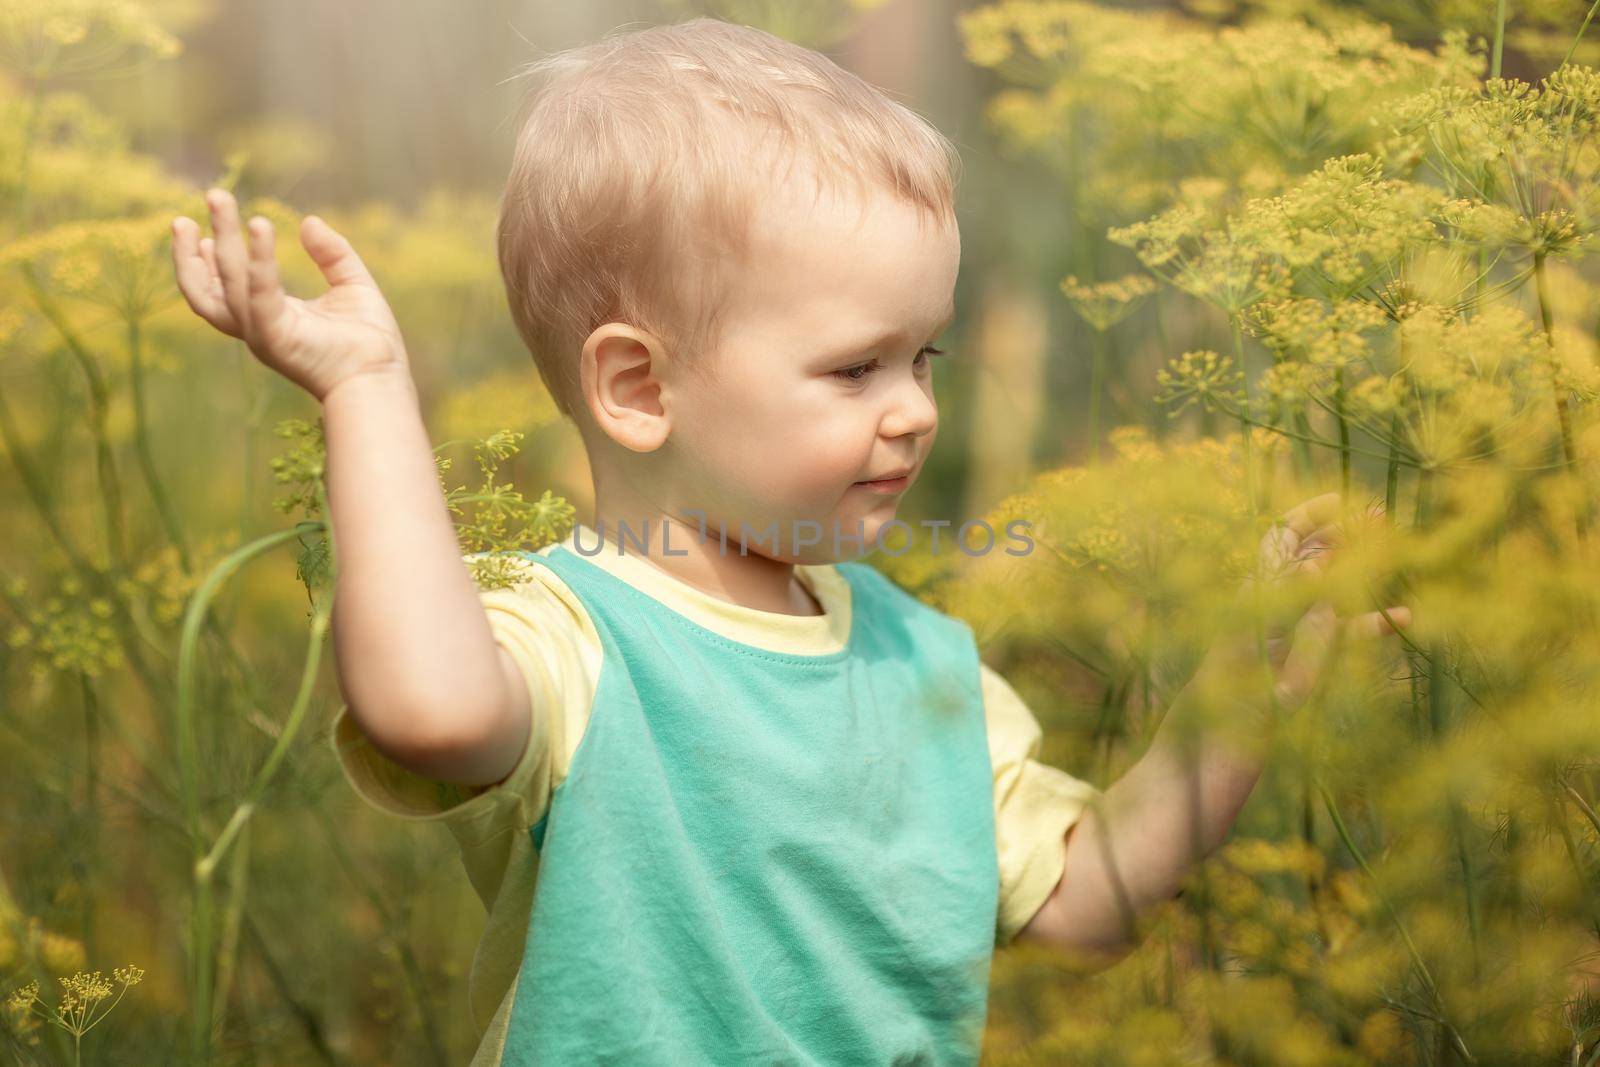 Little boy in the garden among large, yellow dill plants by Lincikas